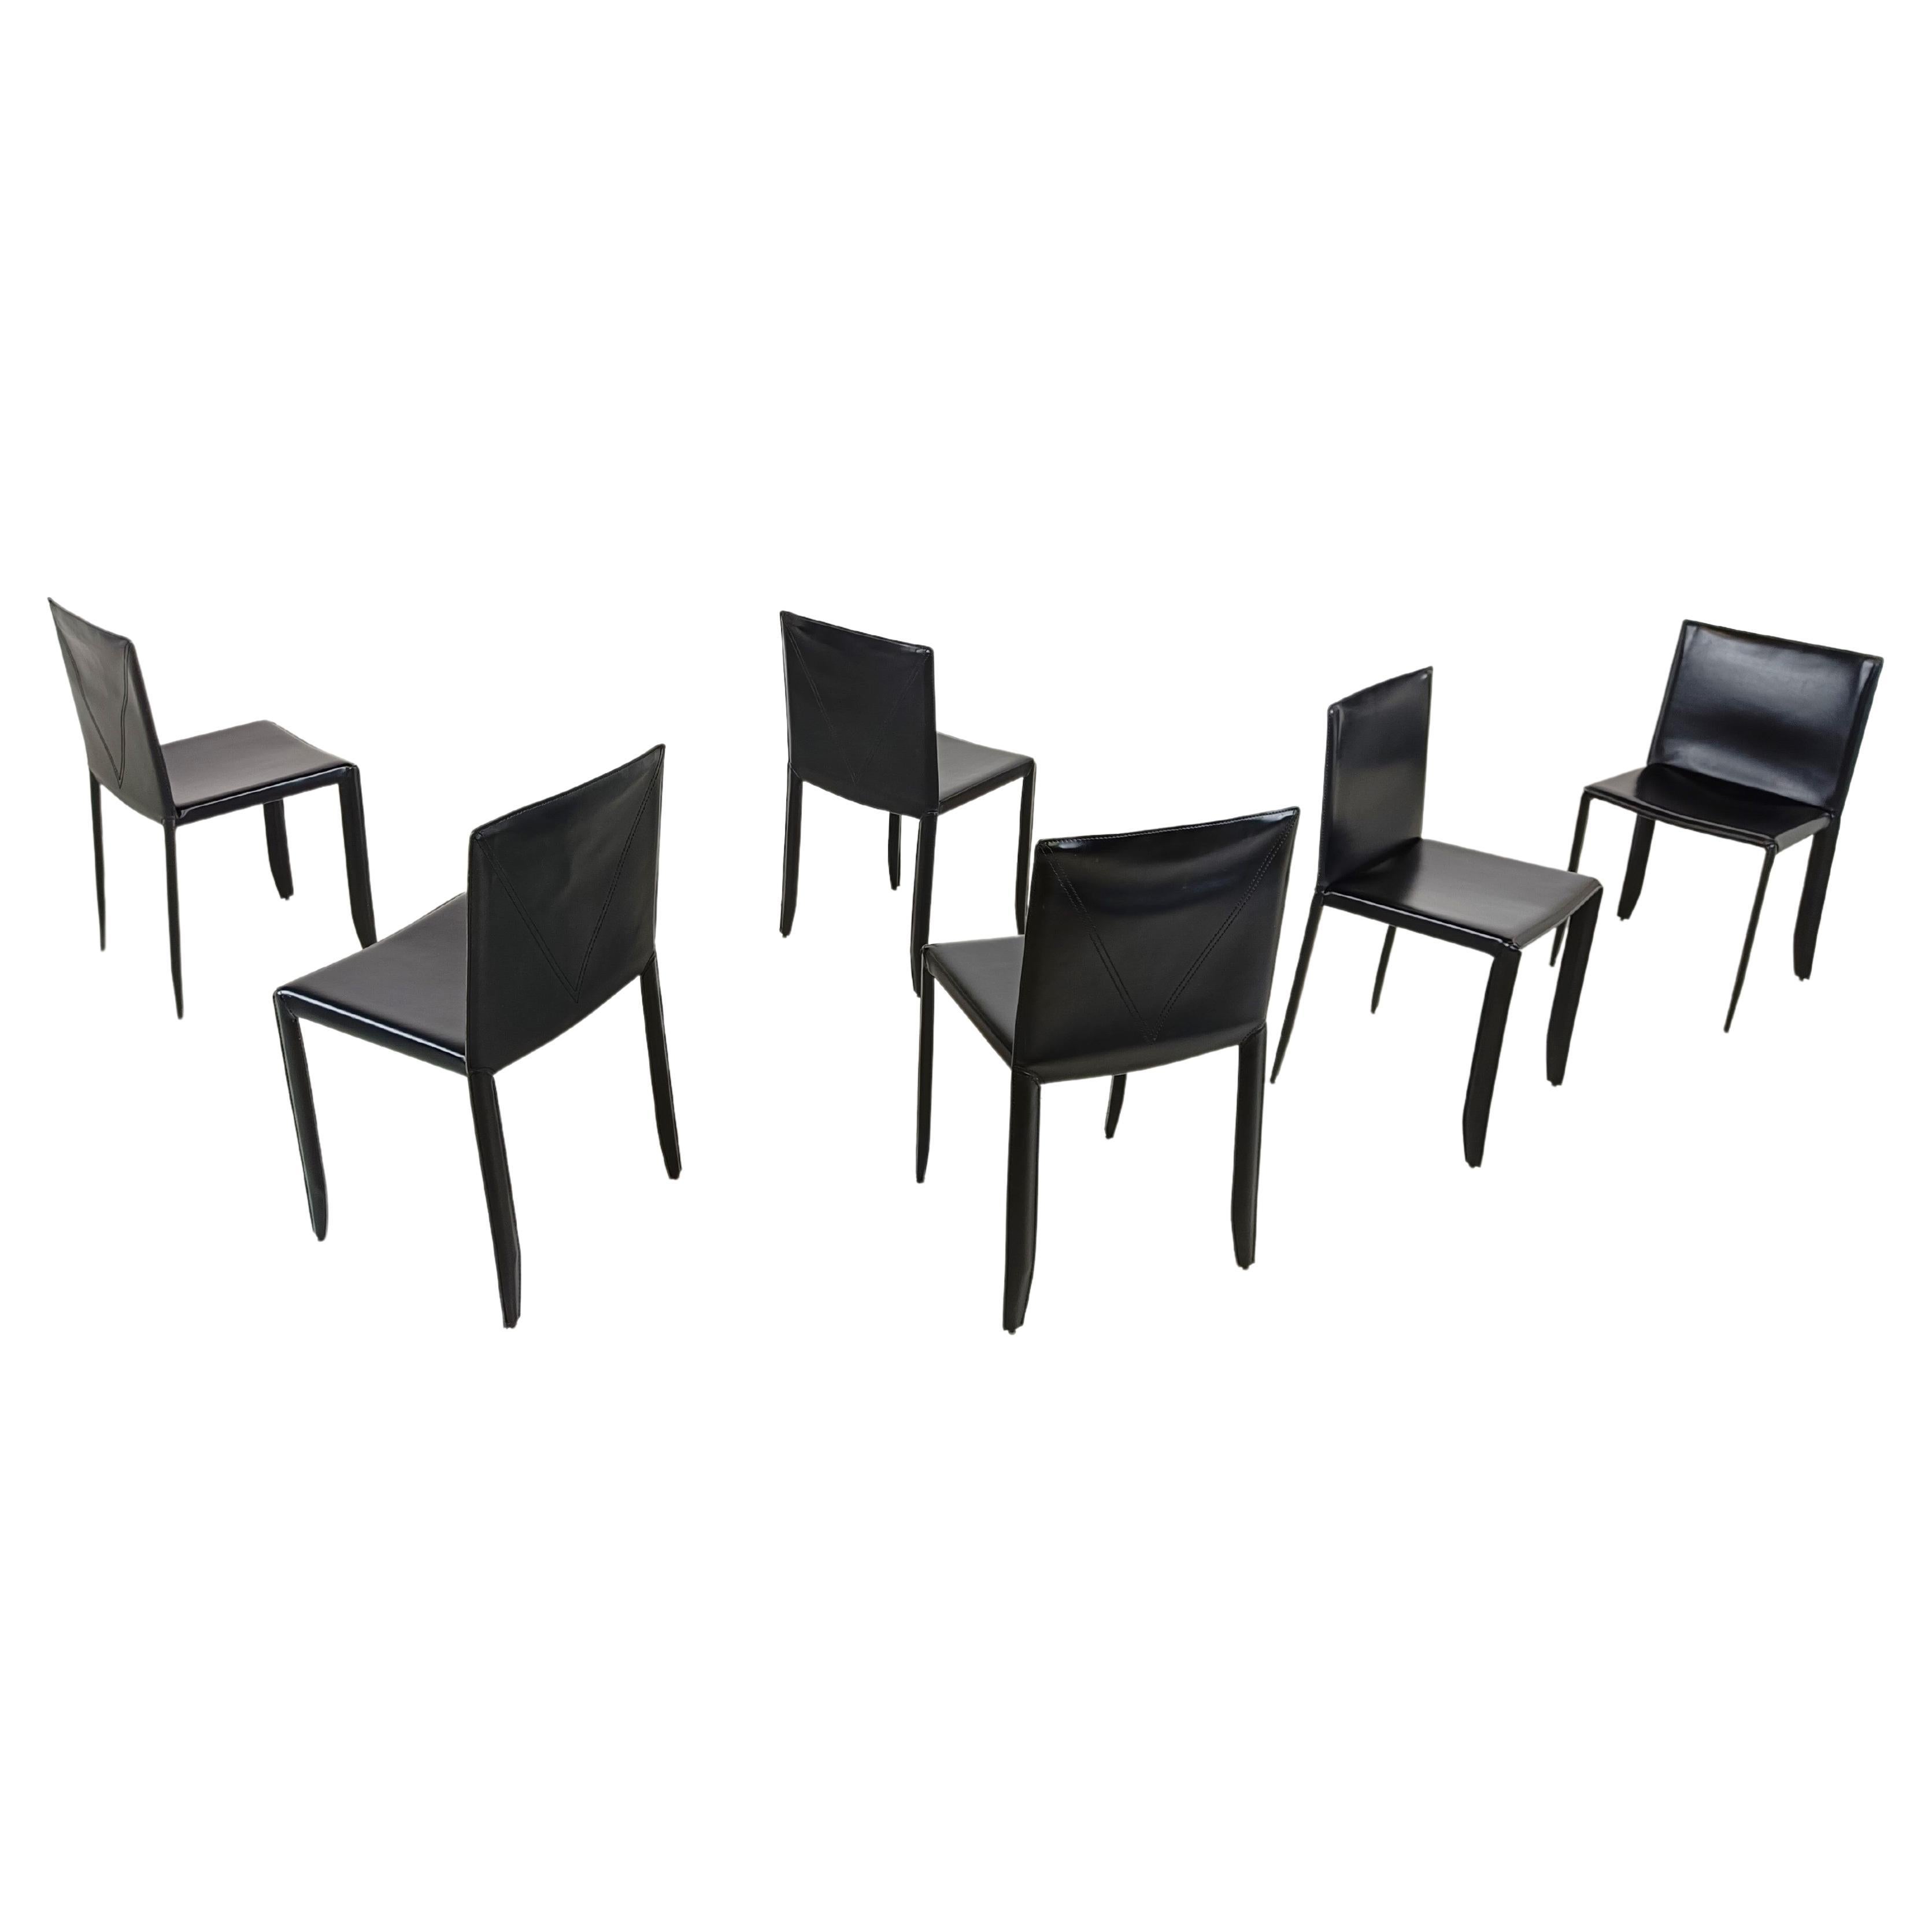 Black Leather Dining Chairs by Cattelan Italy, Set of 6 - 1980s For Sale